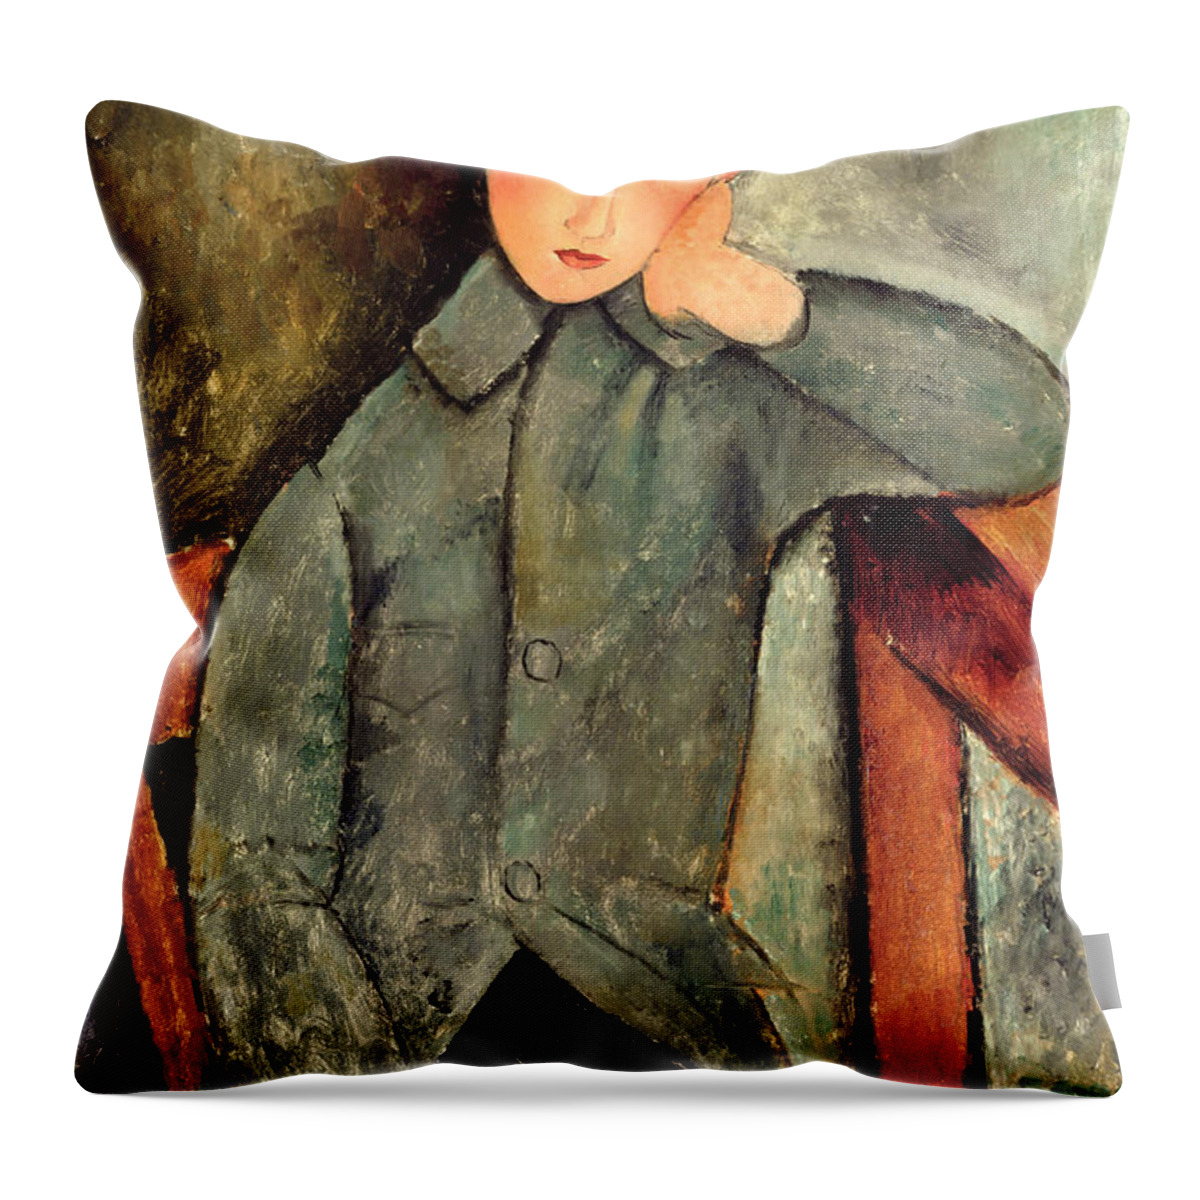 Male Throw Pillow featuring the painting The Boy by Amedeo Modigliani